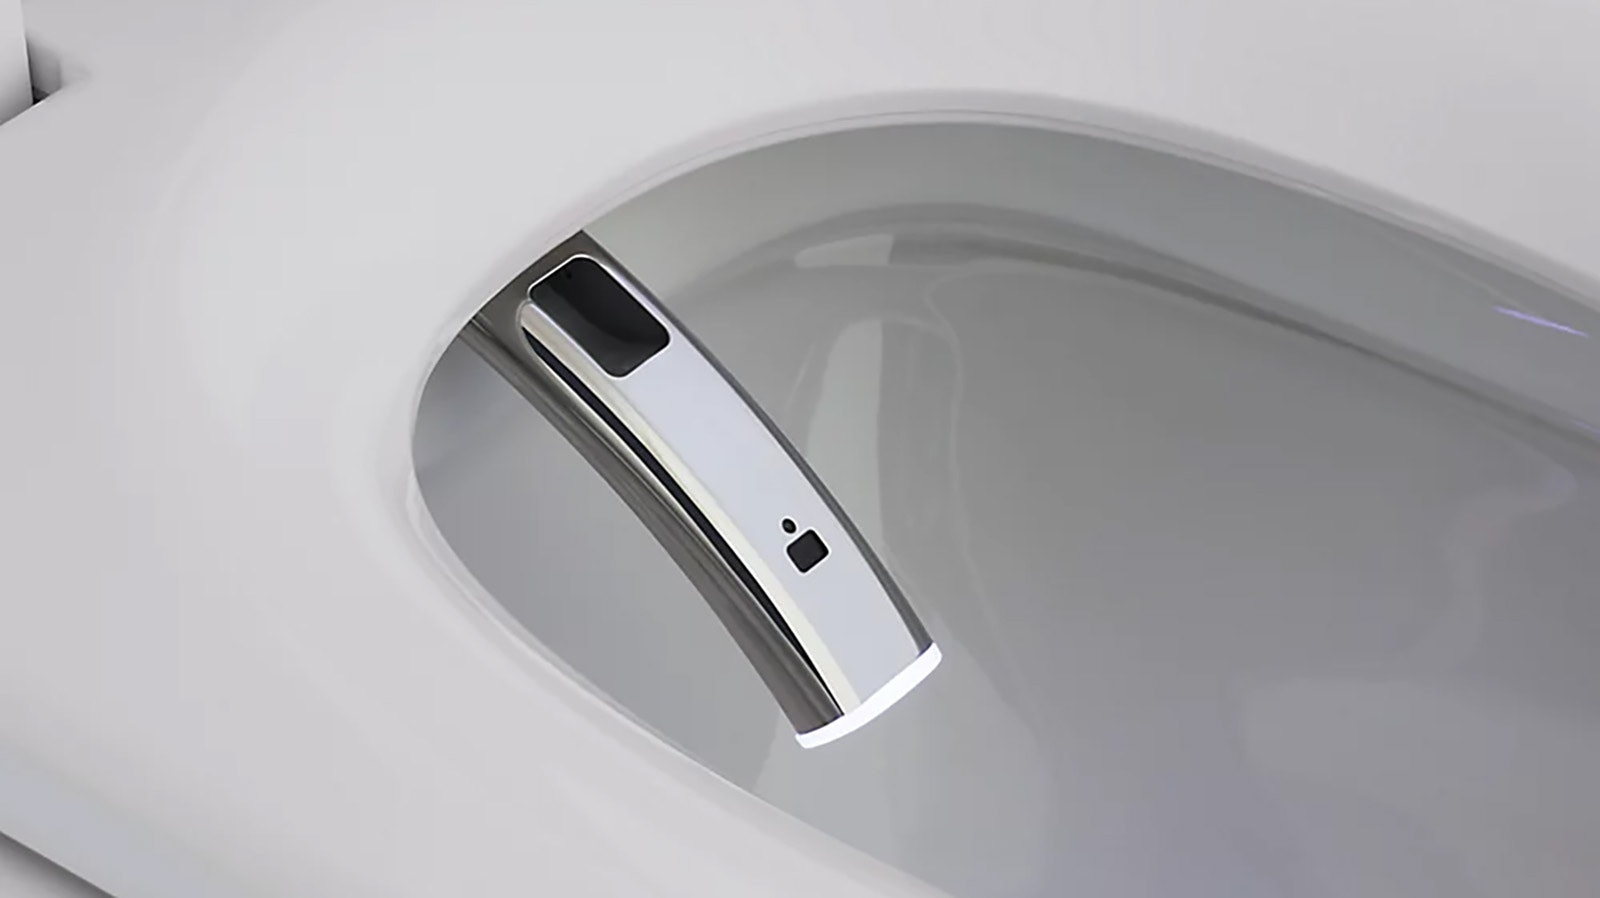 The Kohler Numi 2.0 smart toilet is a top model in the United States, selling for more than $9,900. It features LED lighting, automatic lid, heated seat, bidet and even a built-in Alexa voice assistant.